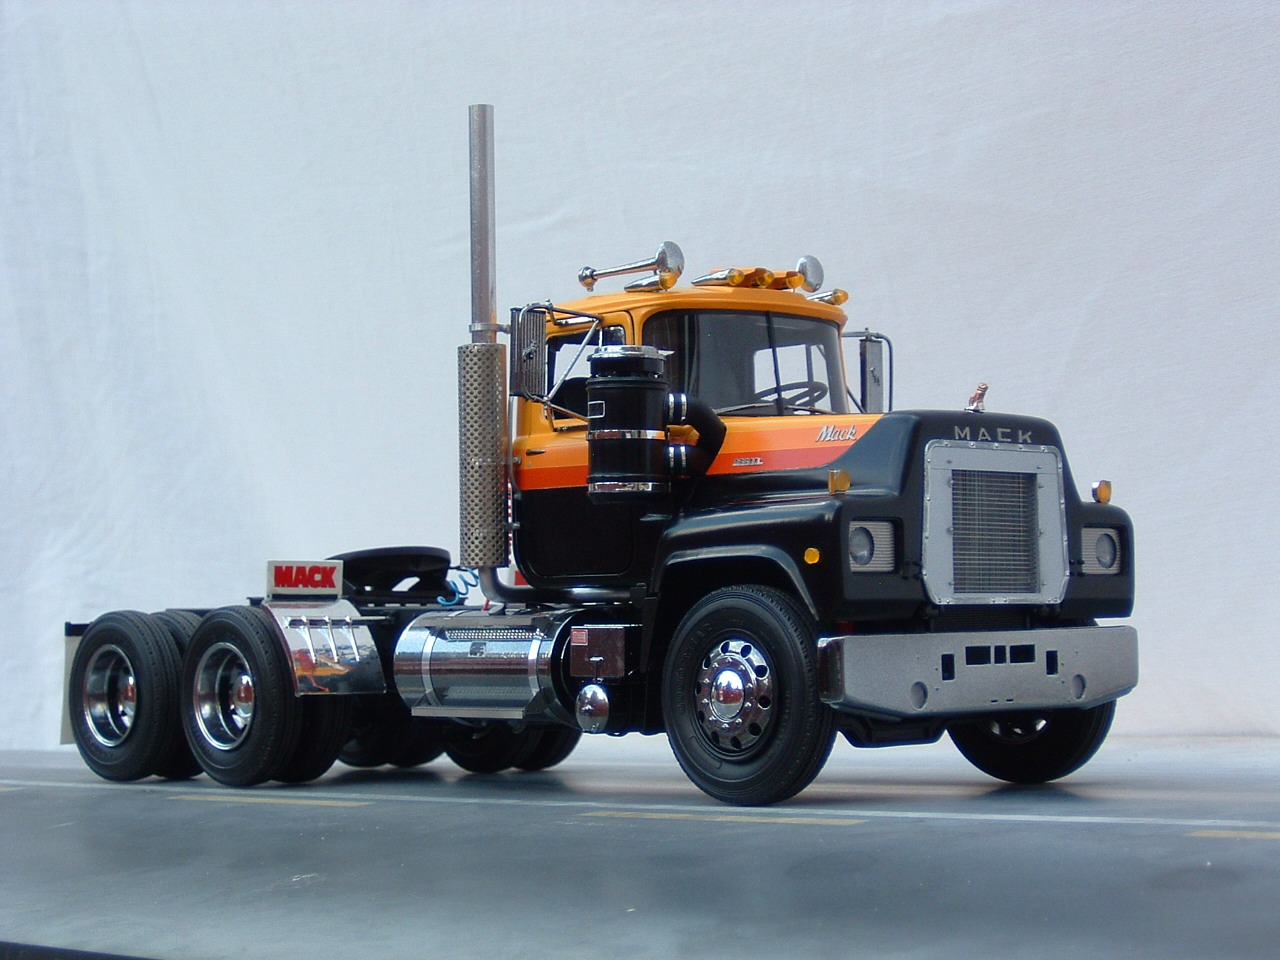 Value-Liner scale model finished. - Antique and Classic Mack Trucks